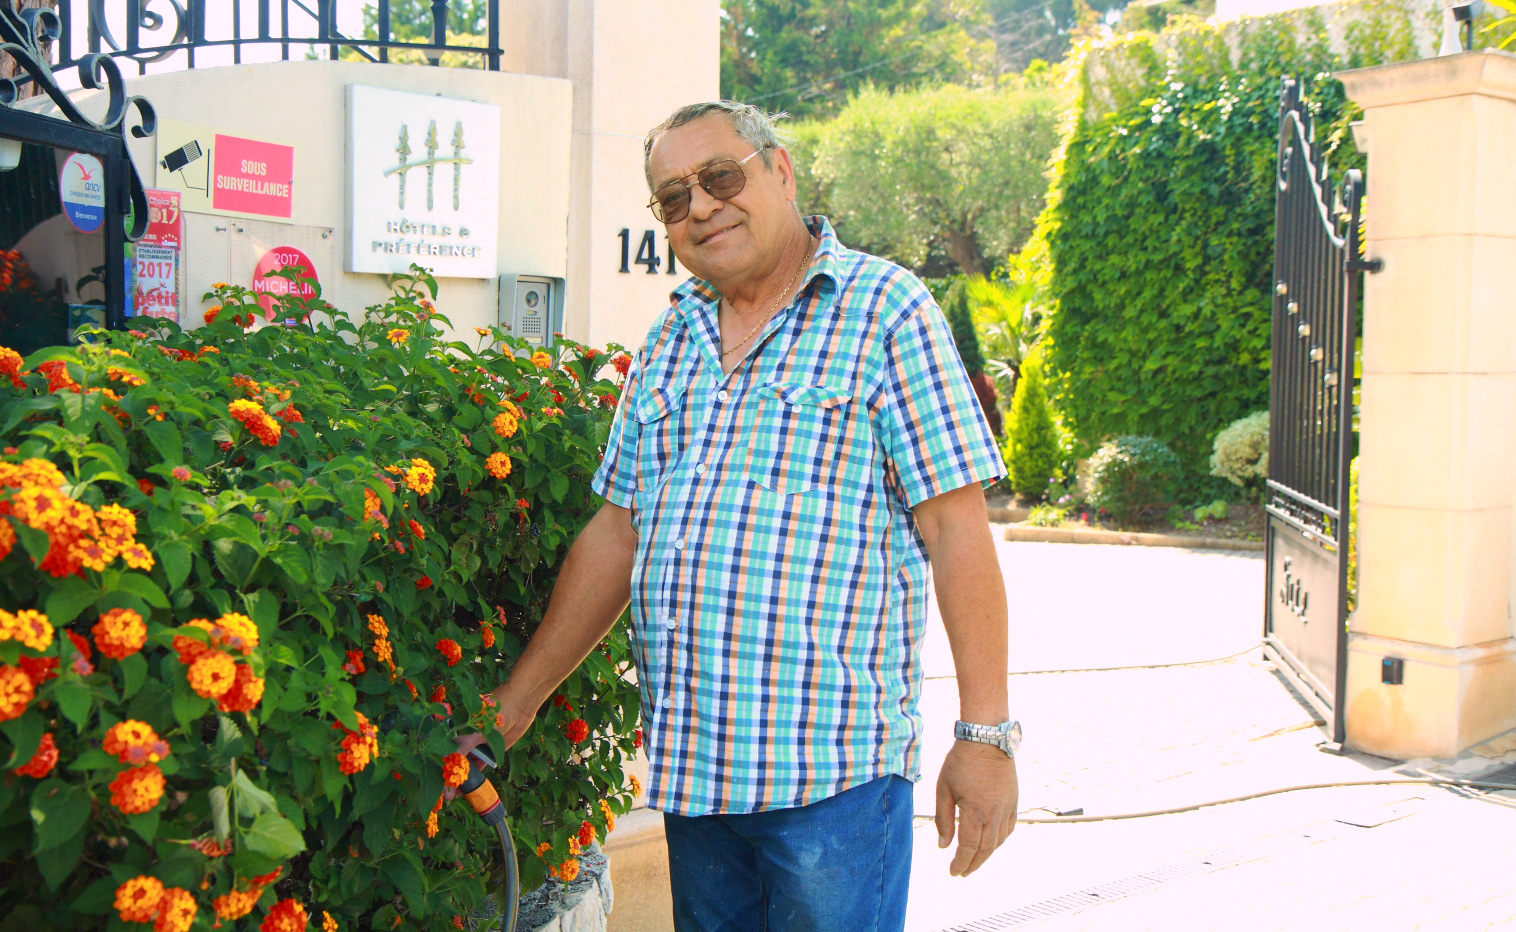 Lionel – Gardener and Caretaker at the Hotel Beau Site.